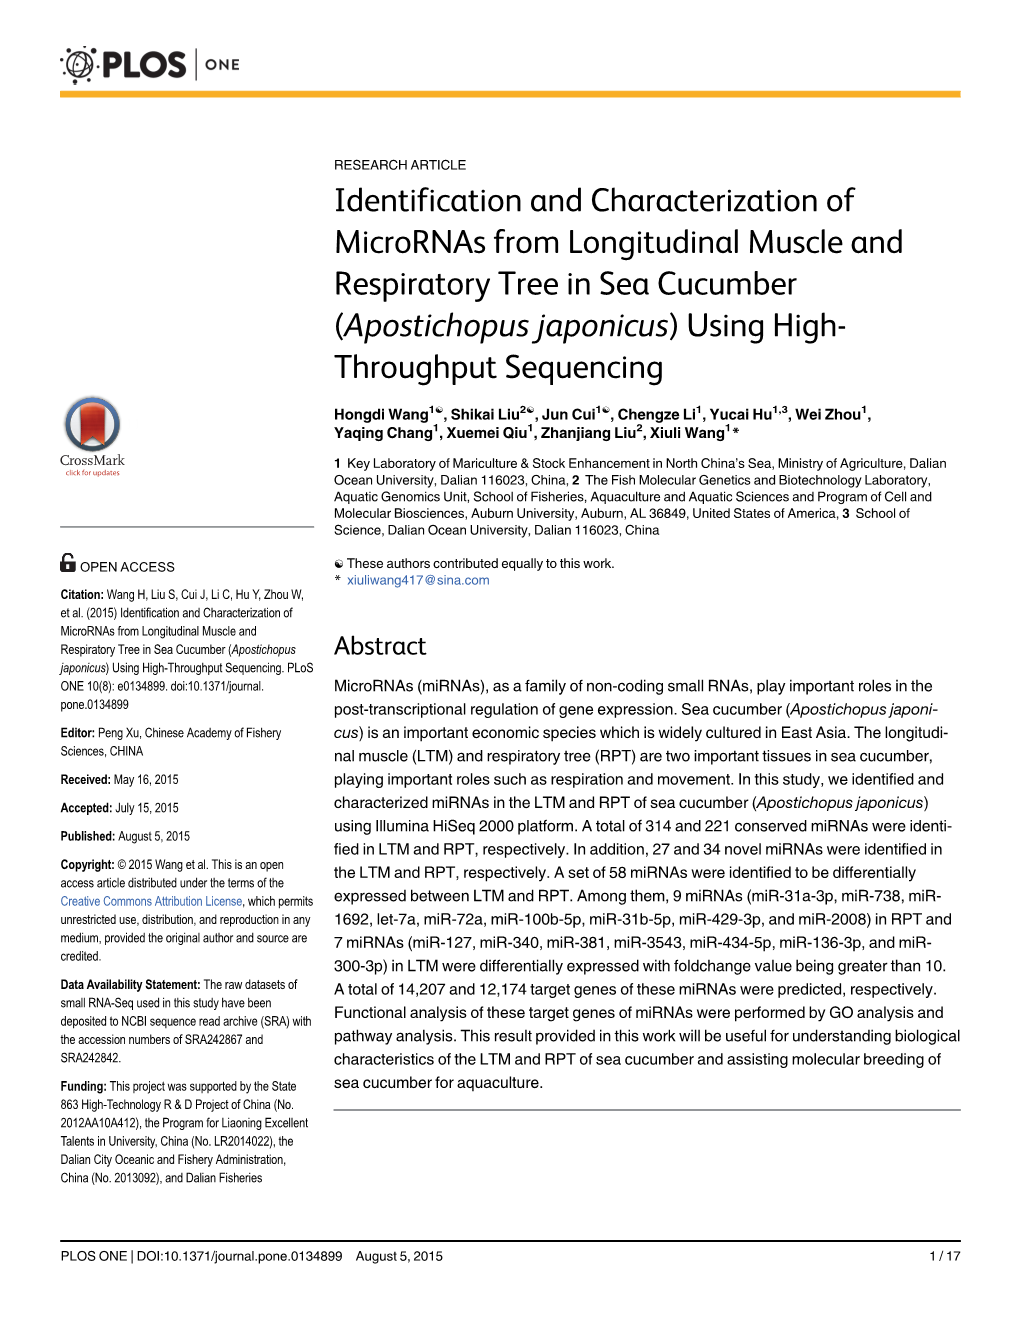 Identification and Characterization of Micrornas from Longitudinal